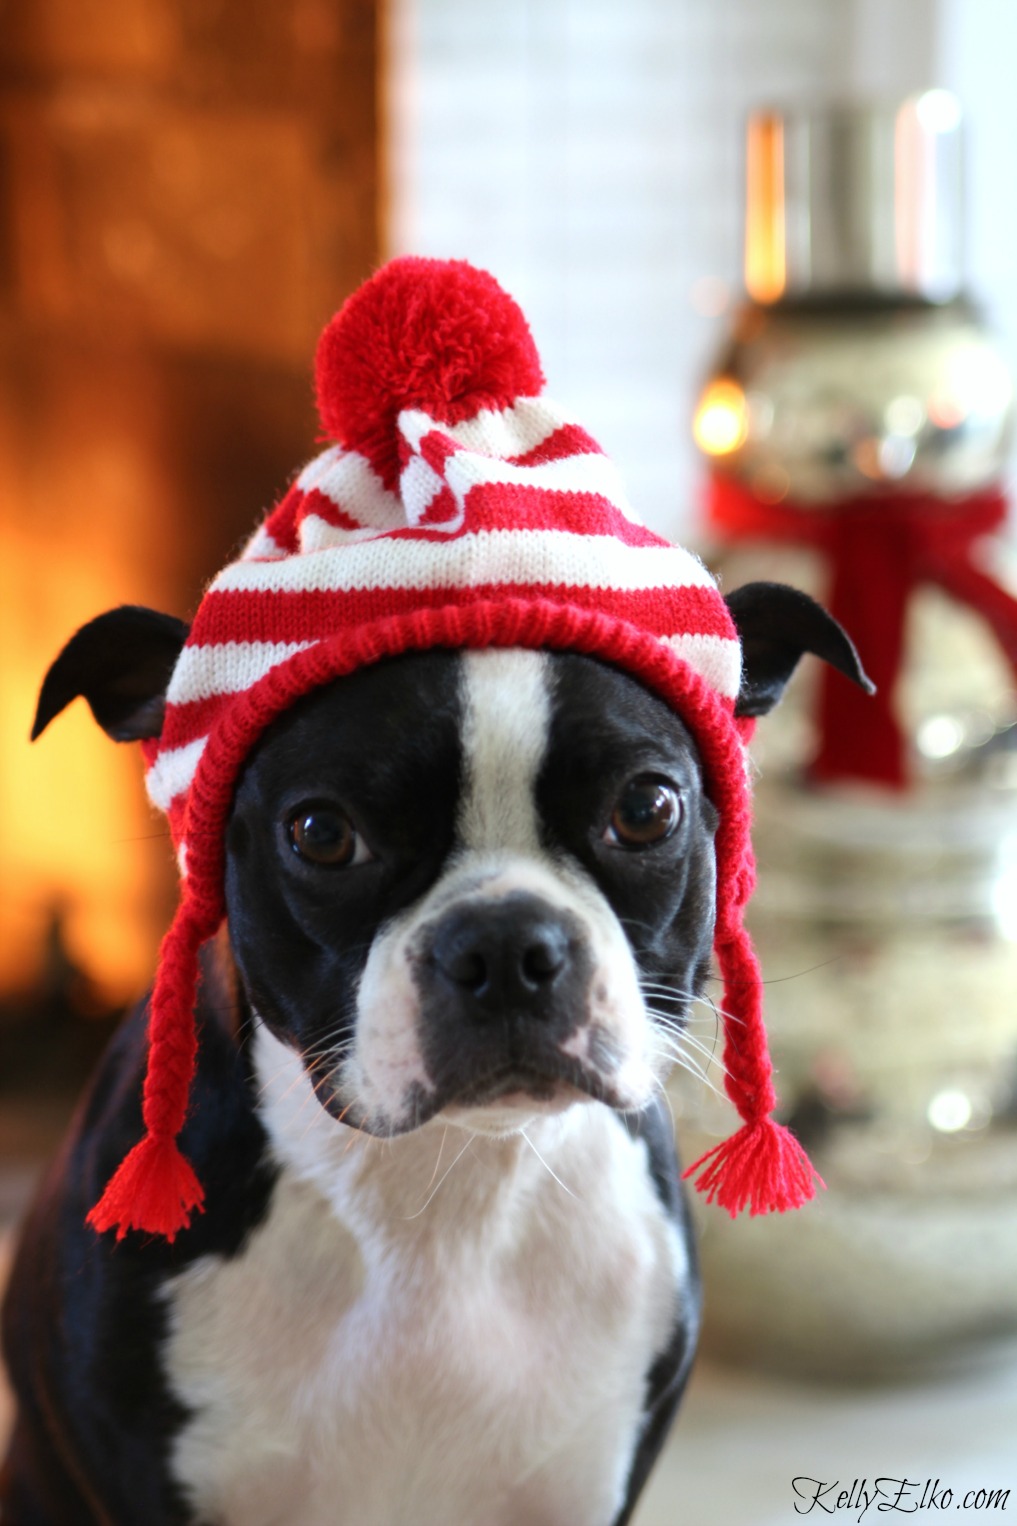 Dogs in Sweaters! Love this adorable hat on this Boston Terrier kellyelko.com #petclothes #dogclothes #dogsweater #bostonterrier #kellyelko